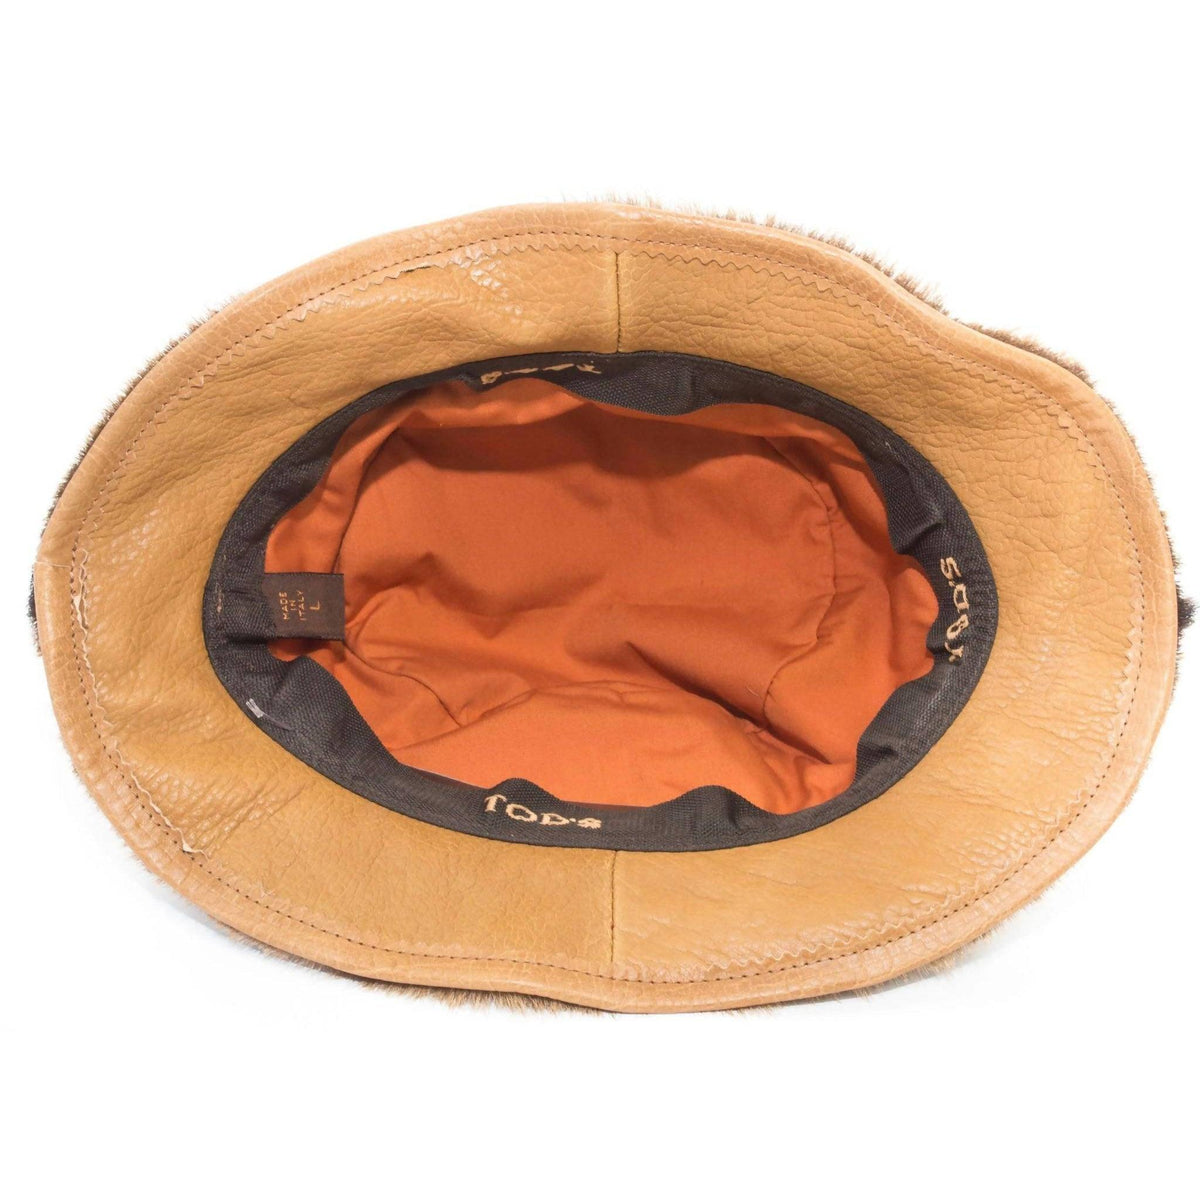 Pre-Owned TOD'S Orange Goat Fur Bucket Hat | Size L - theREMODA